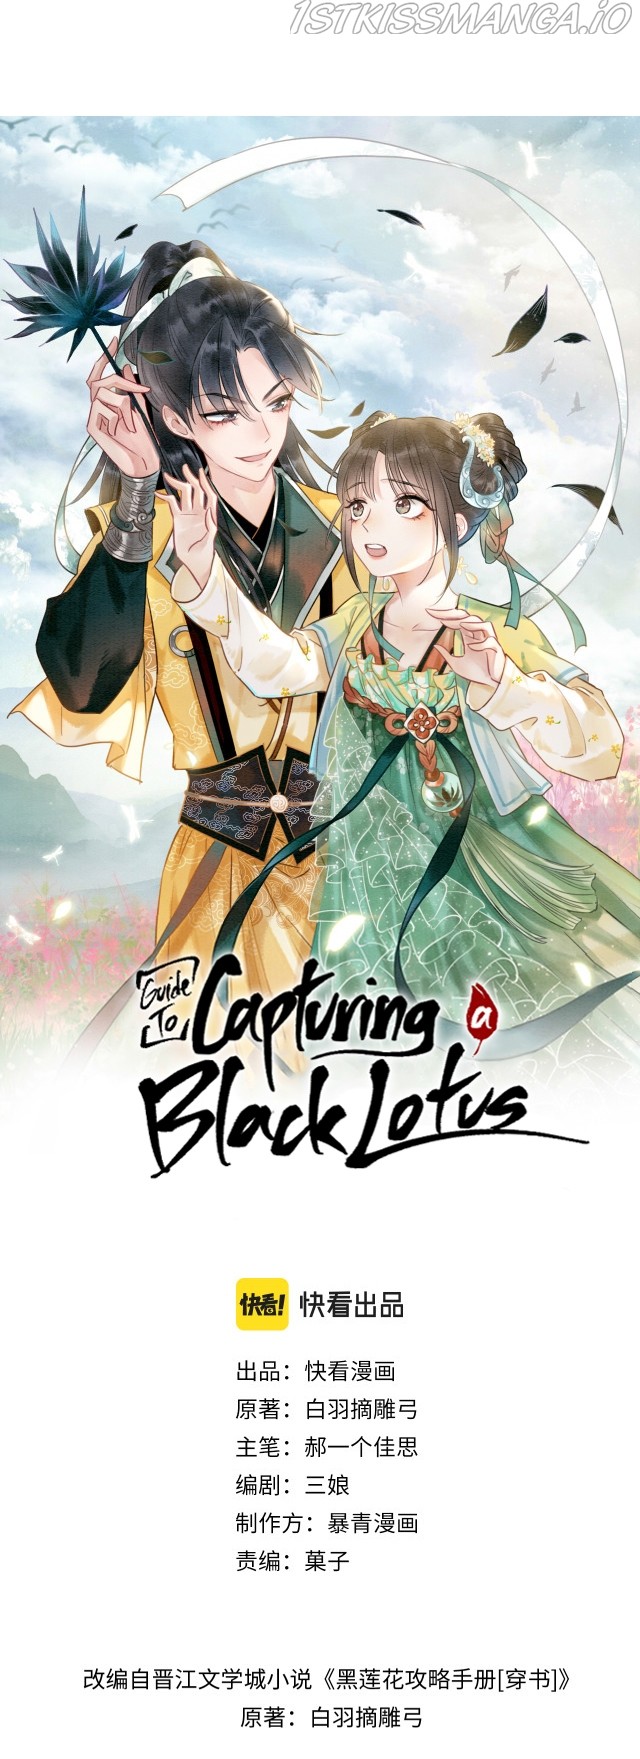 The Guide To Capturing A Black Lotus - Page 2